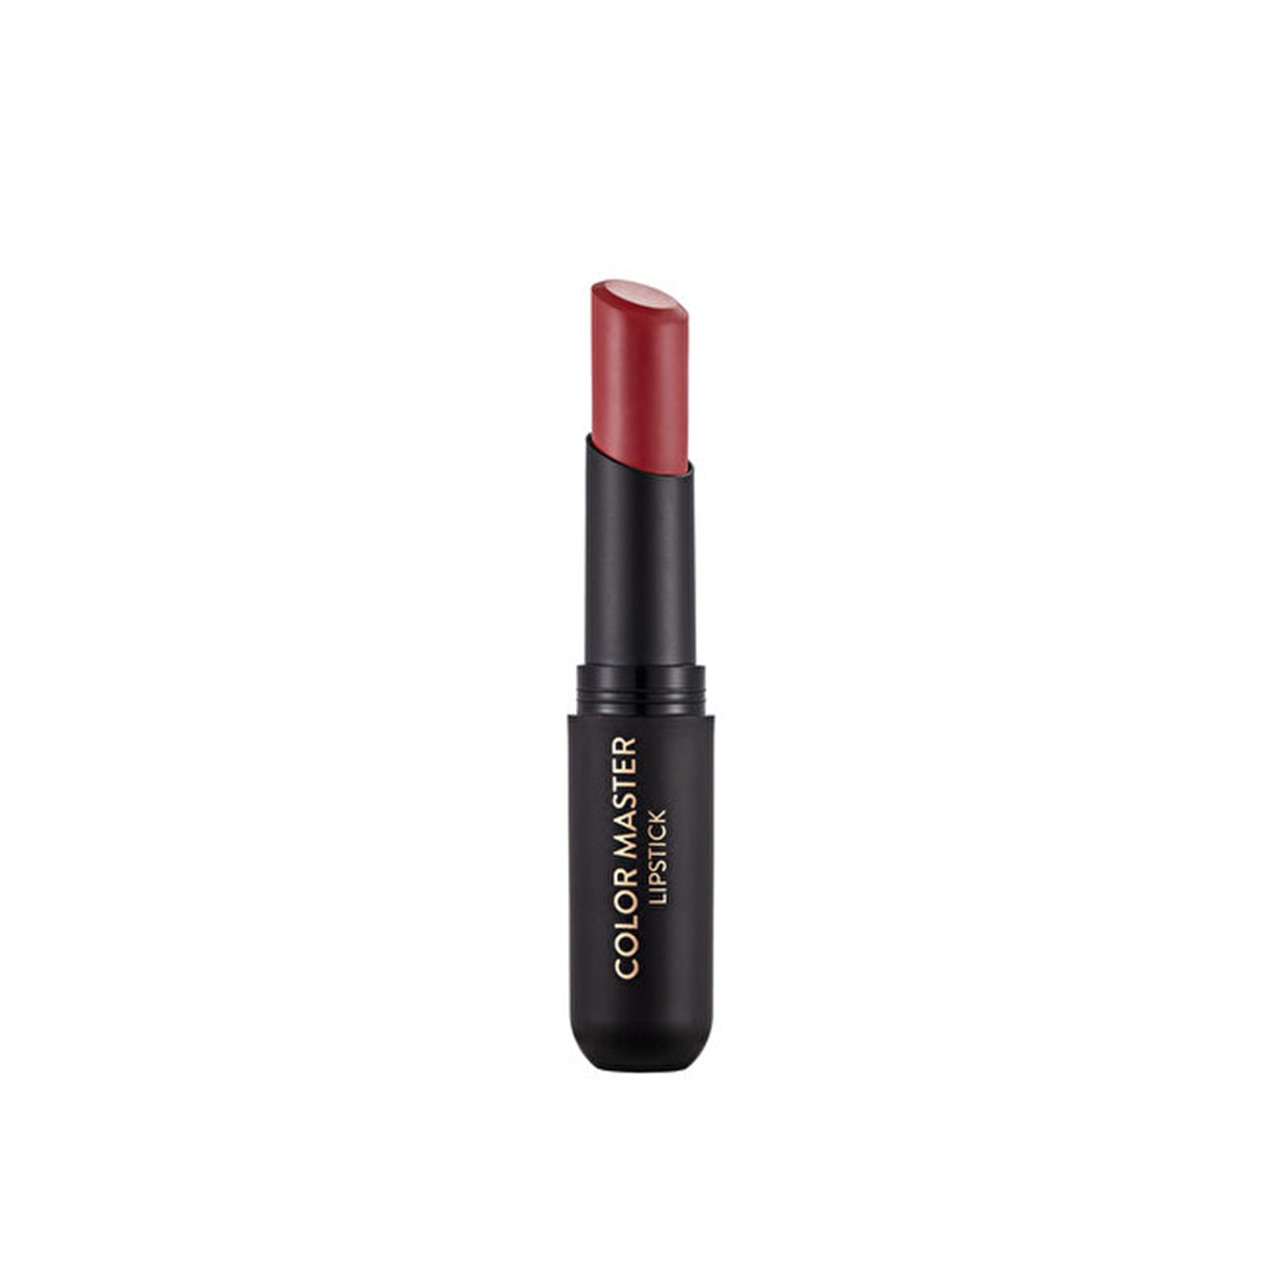 Flormar Color Master Lipstick 13 Exotic Beauty 3g